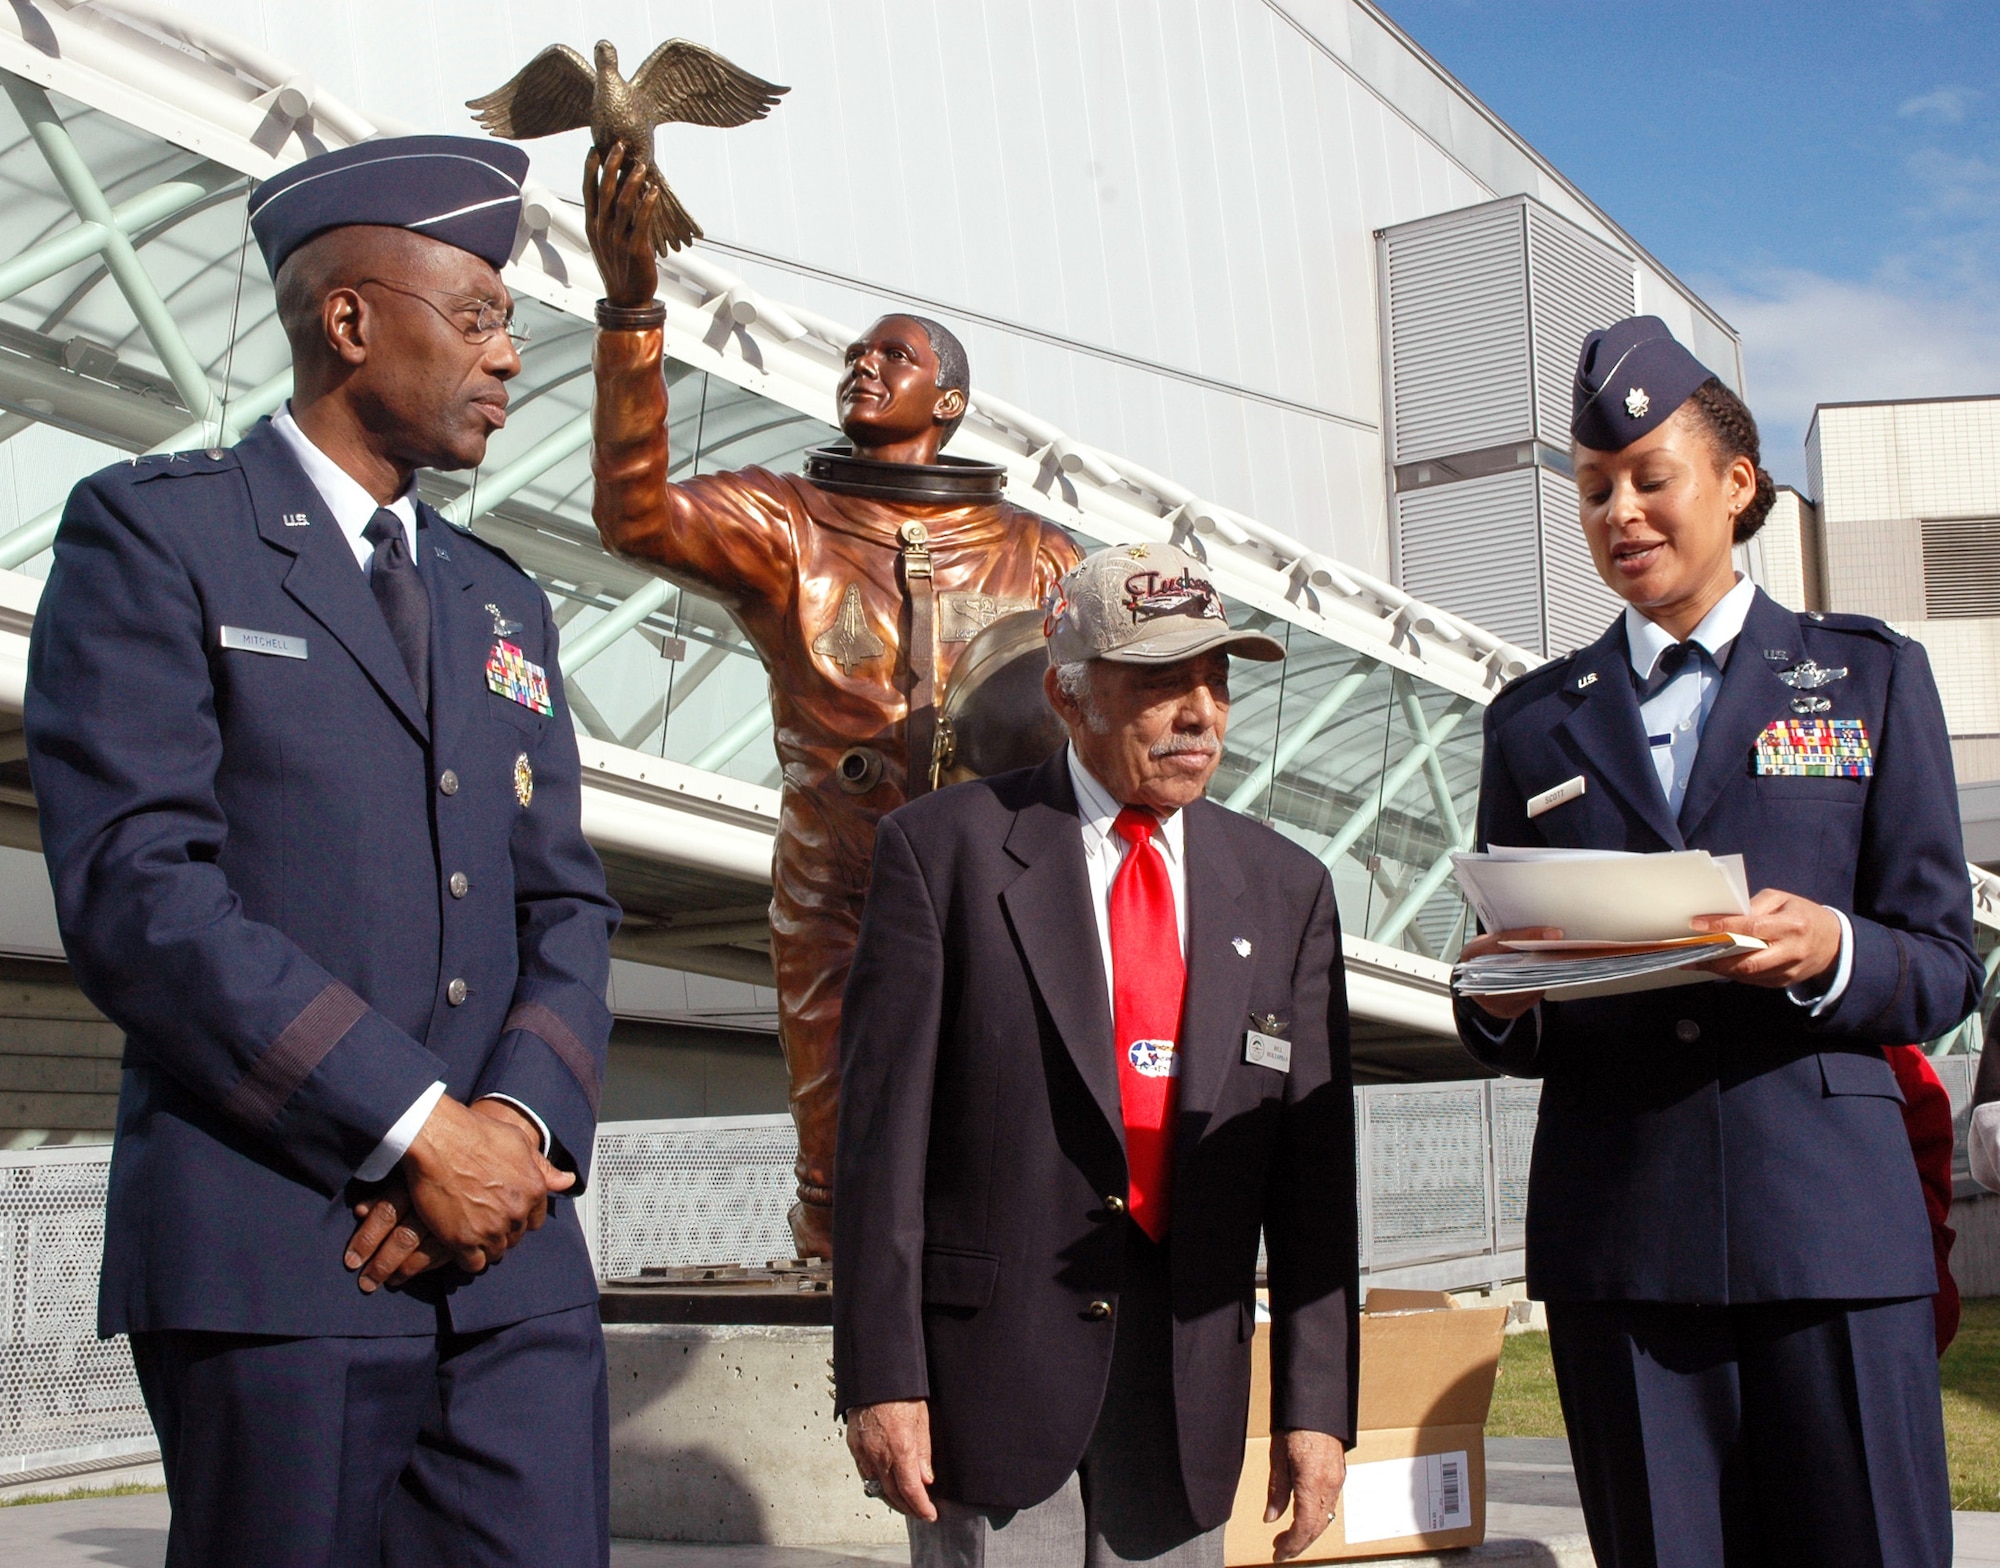 Maj. Gen. Harold L. "Mitch" Mitchell, Tuskegee Airman Retired Lt. Col. Bill Holloman and Lt. Col. Kimberly Scott prepare to present certificates to students as part of the Michael Anderson Memorial Scholarship event at Seattle's Museum of Flight. Colonel Holloman is one of the famed "Tuskegee Airmen" who broke the military's color barrier by becoming a World War II fighter pilot. He died June 11, 2010, in Kent, Wash. General Mitchell is the Deputy Inspector General of the Air Force, in Washington D.C. (U.S. Air Force photo/Staff Sgt. Elizabeth Moody)